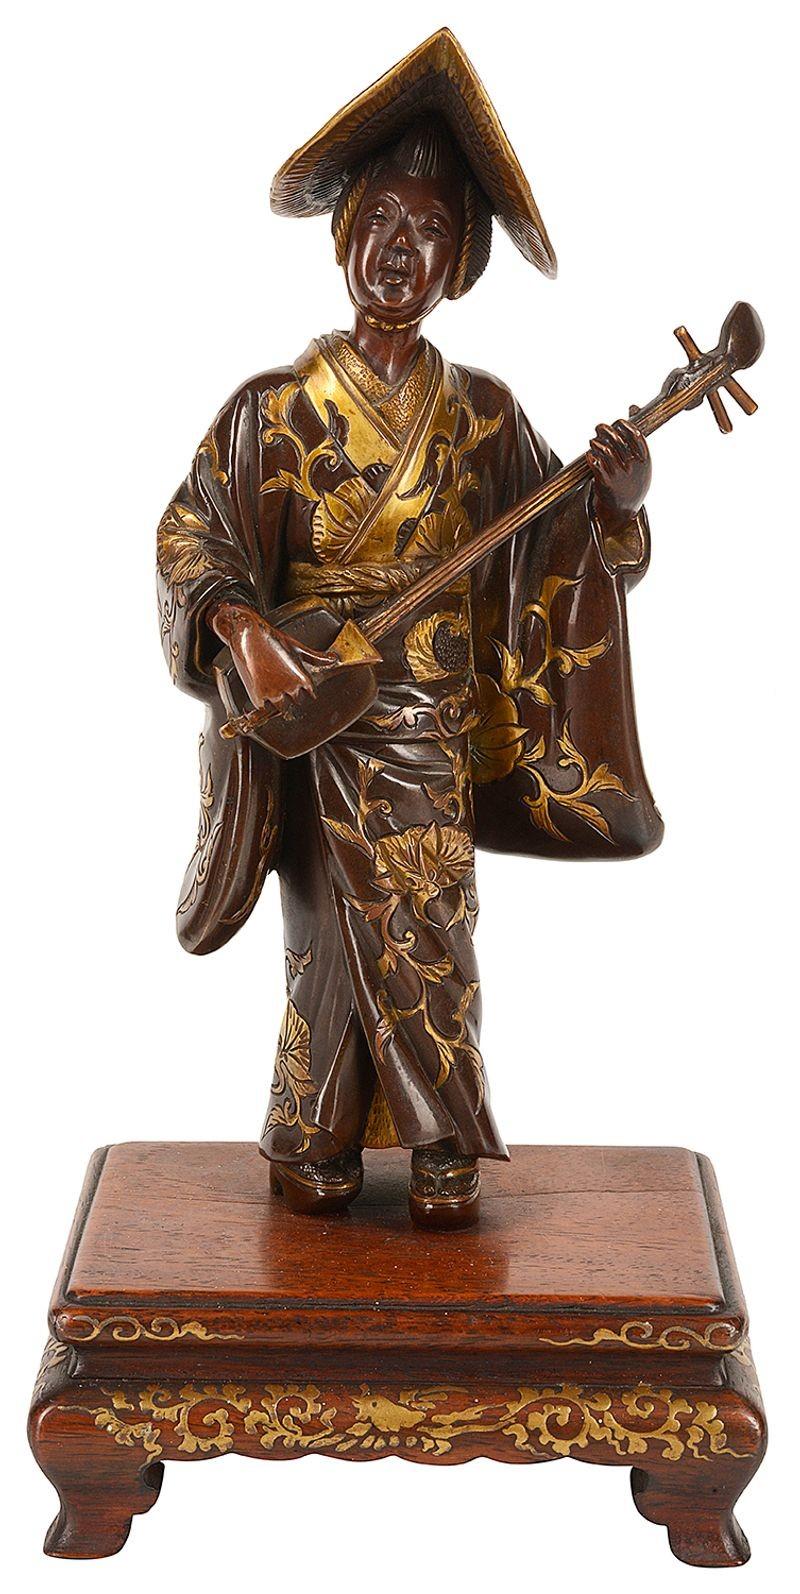 A fine quality Meiji period (1868-1912) Miyao bronze statue of a female muscian, having wonderful gilded high lights and mounted on a hardwood stand. Signed at the back on a plaque on her cloak.